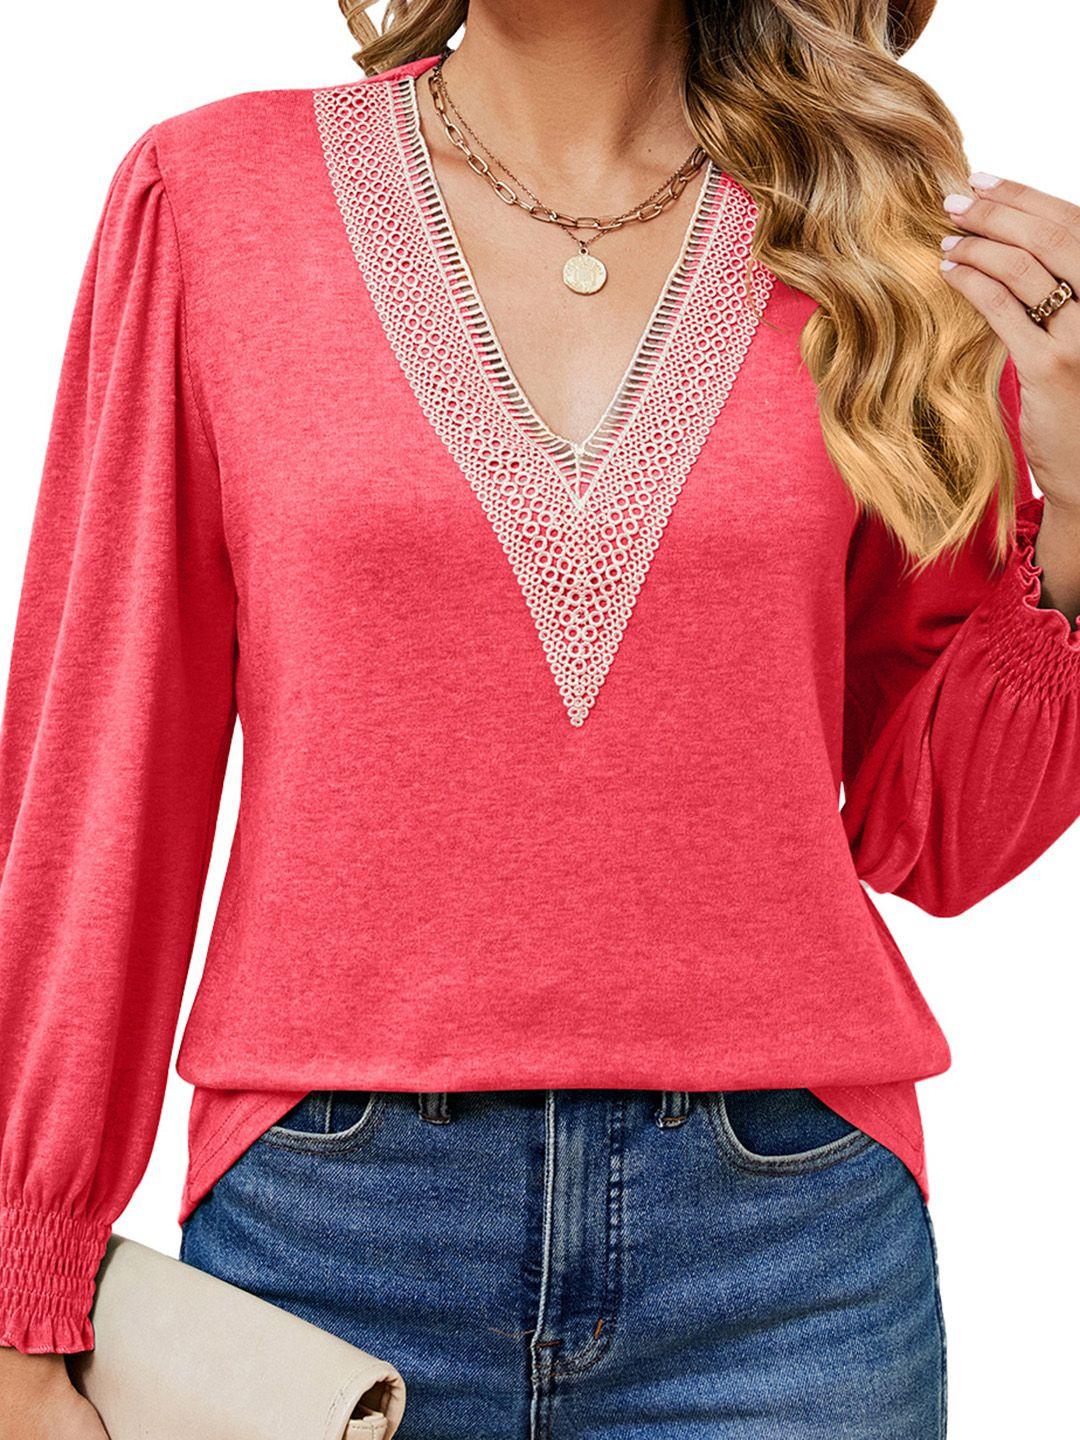 stylecast red v-neck cuffed sleeves top